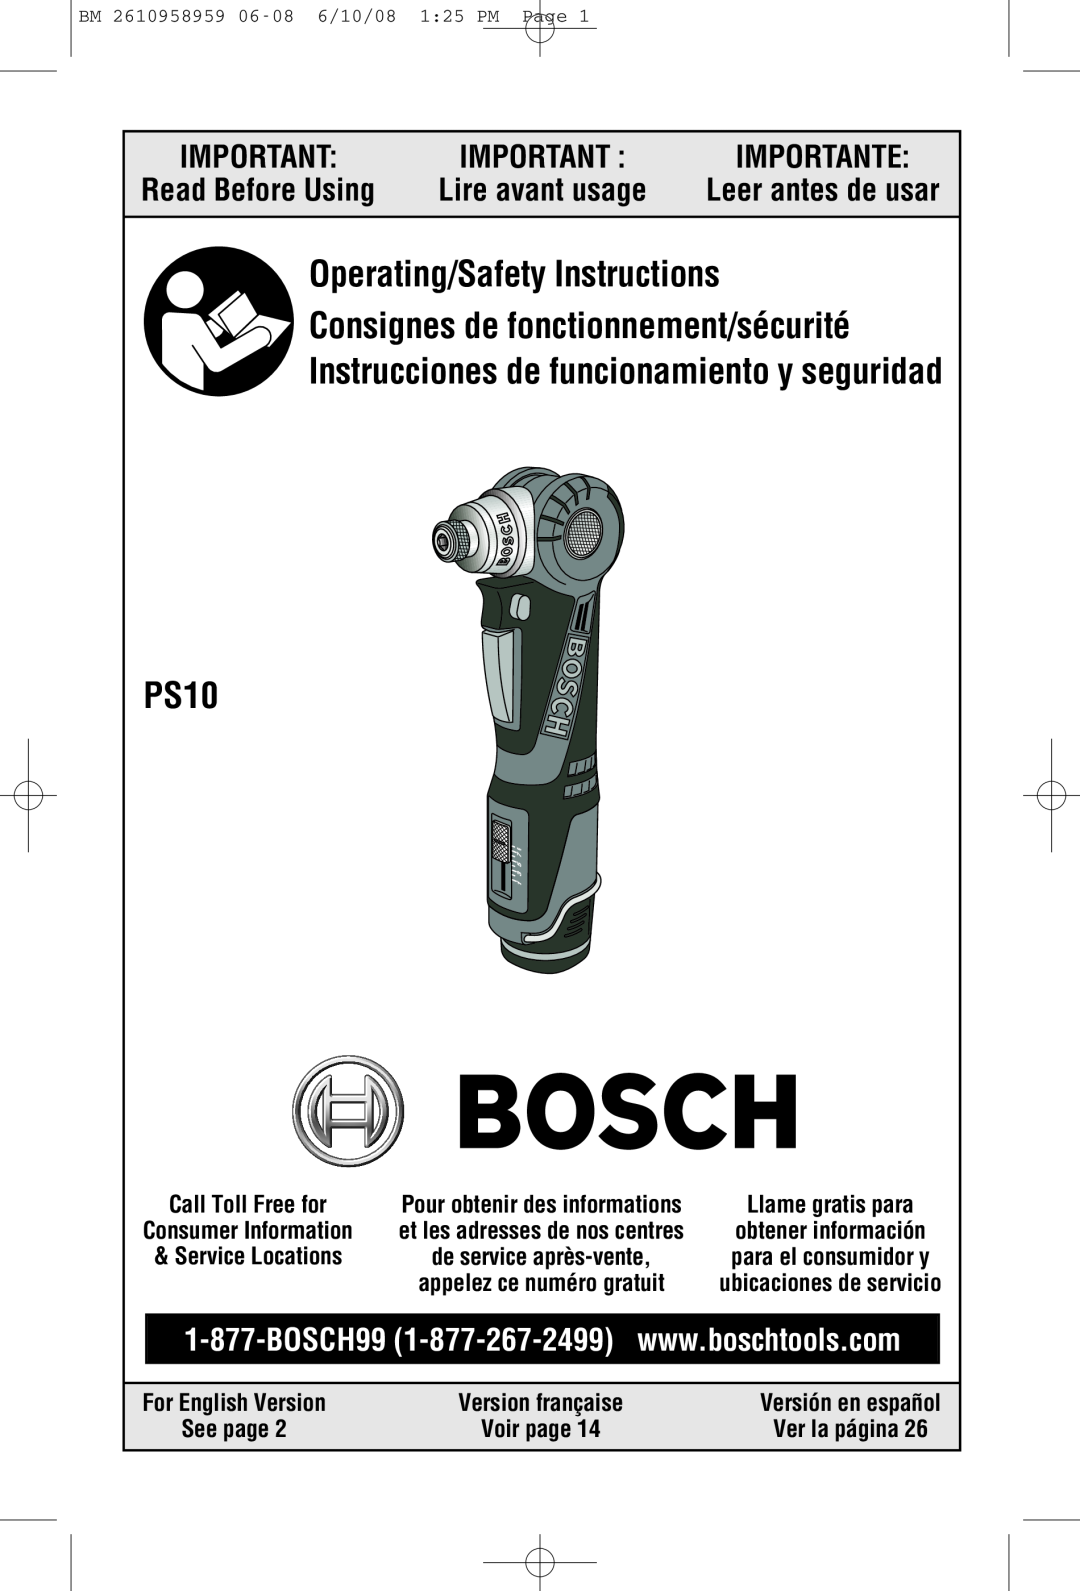 Bosch Power Tools PS10BN manual Read Before Using, Leer antes de usar, Call Toll Free for, Consumer Information, See page 